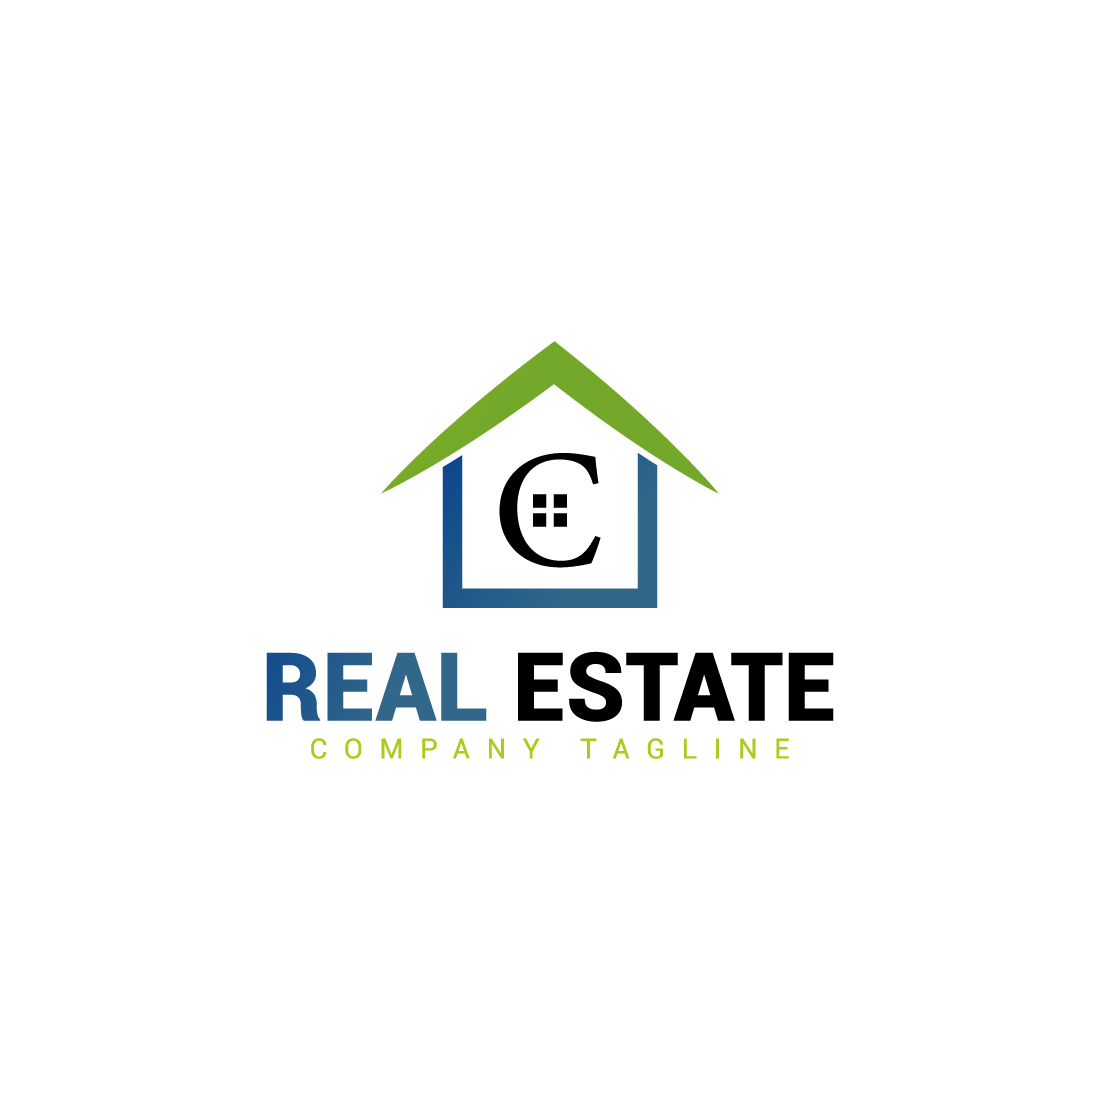 Real estate logo with green, dark blue color and C letter preview image.